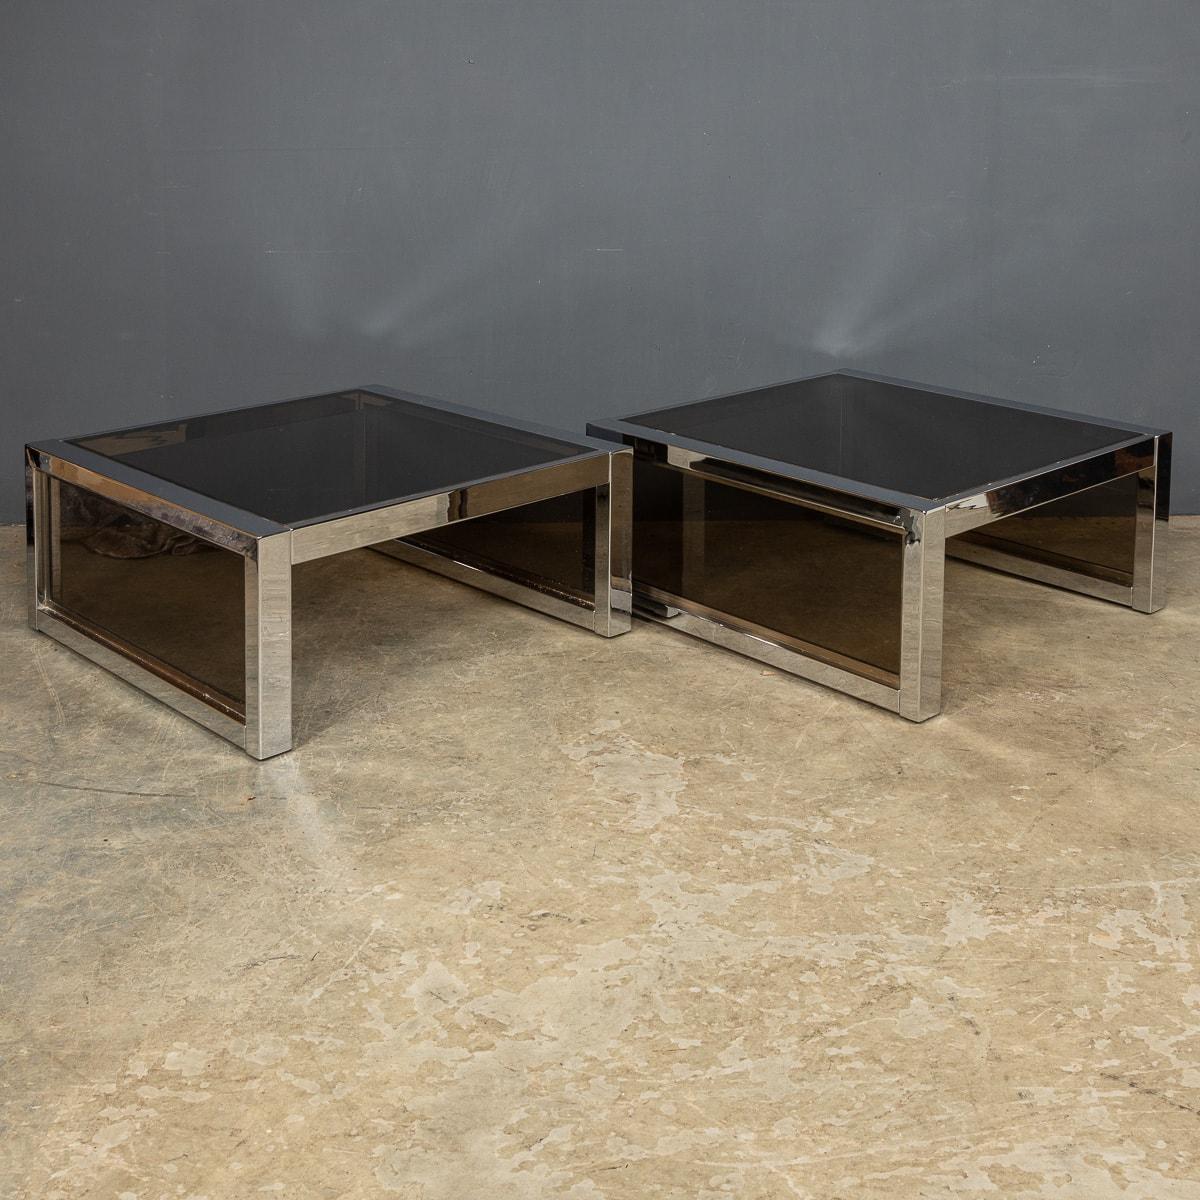 A pair of 20th century polished chrome and smoked glass side tables. A wonderful addition to any interior, that will undoubtedly add style and sophistication.

CONDITION
In Good Condition - wear consistent with age, (please refer to